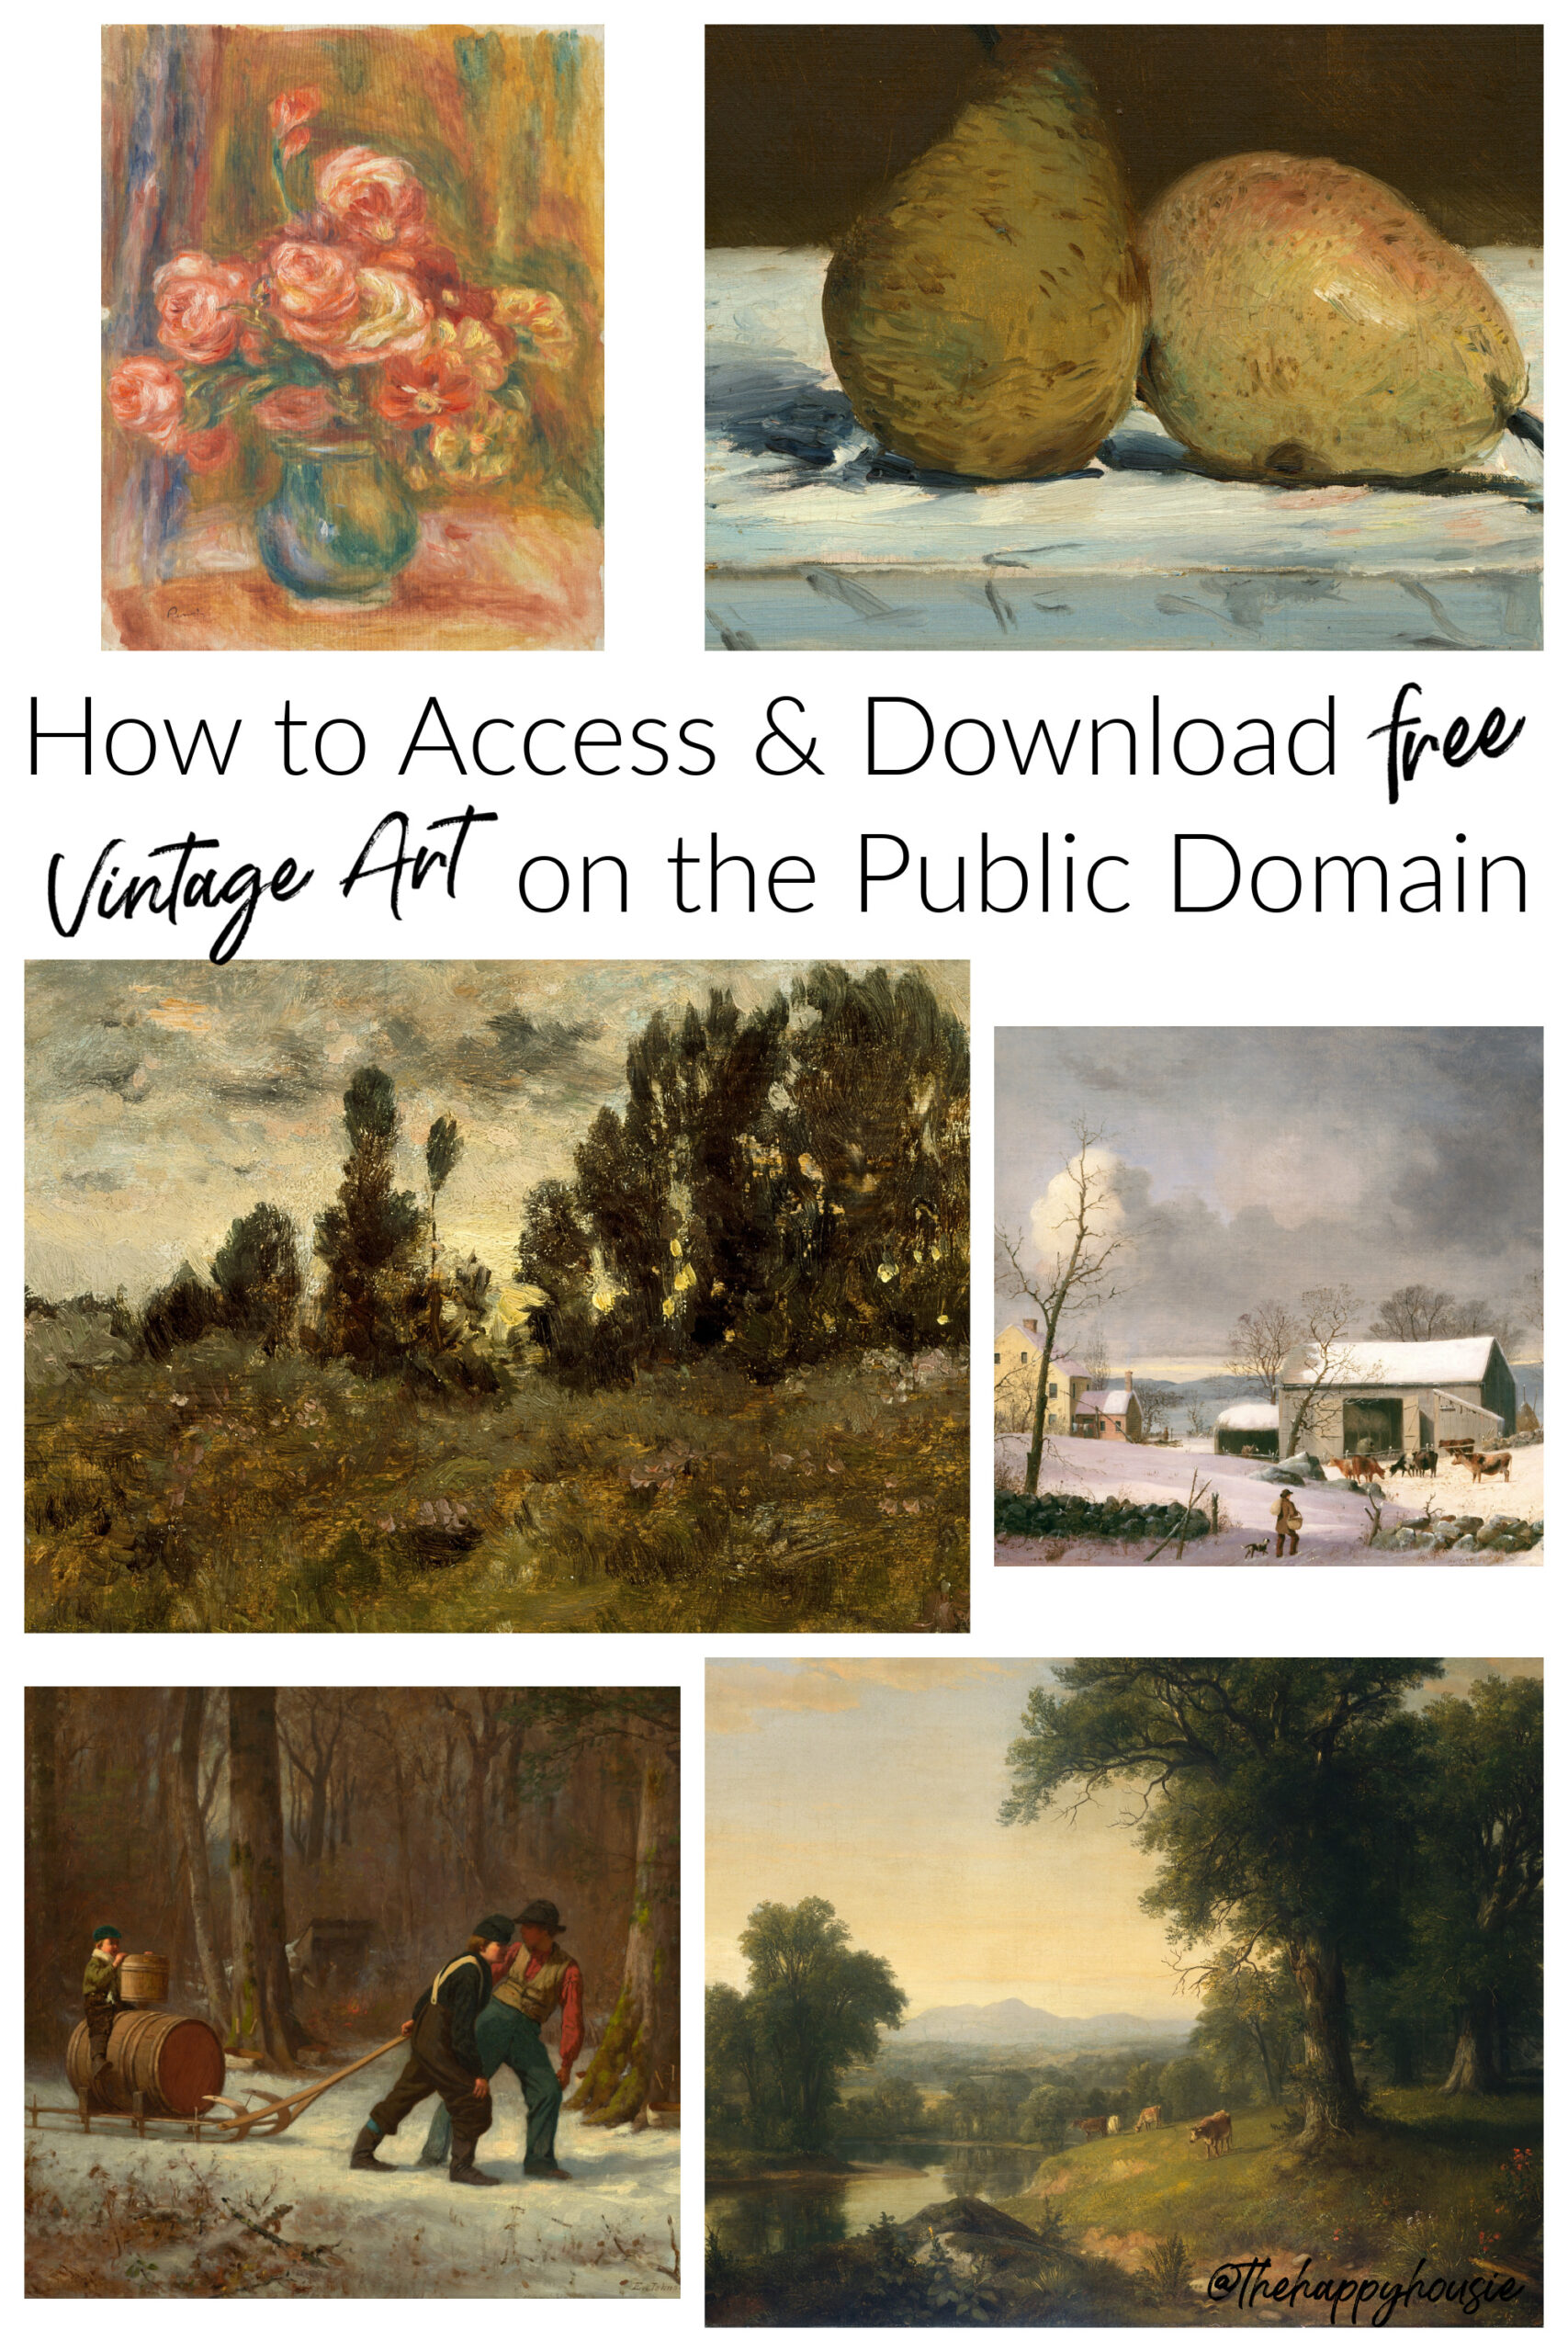 How To access & download free vintage art poster.